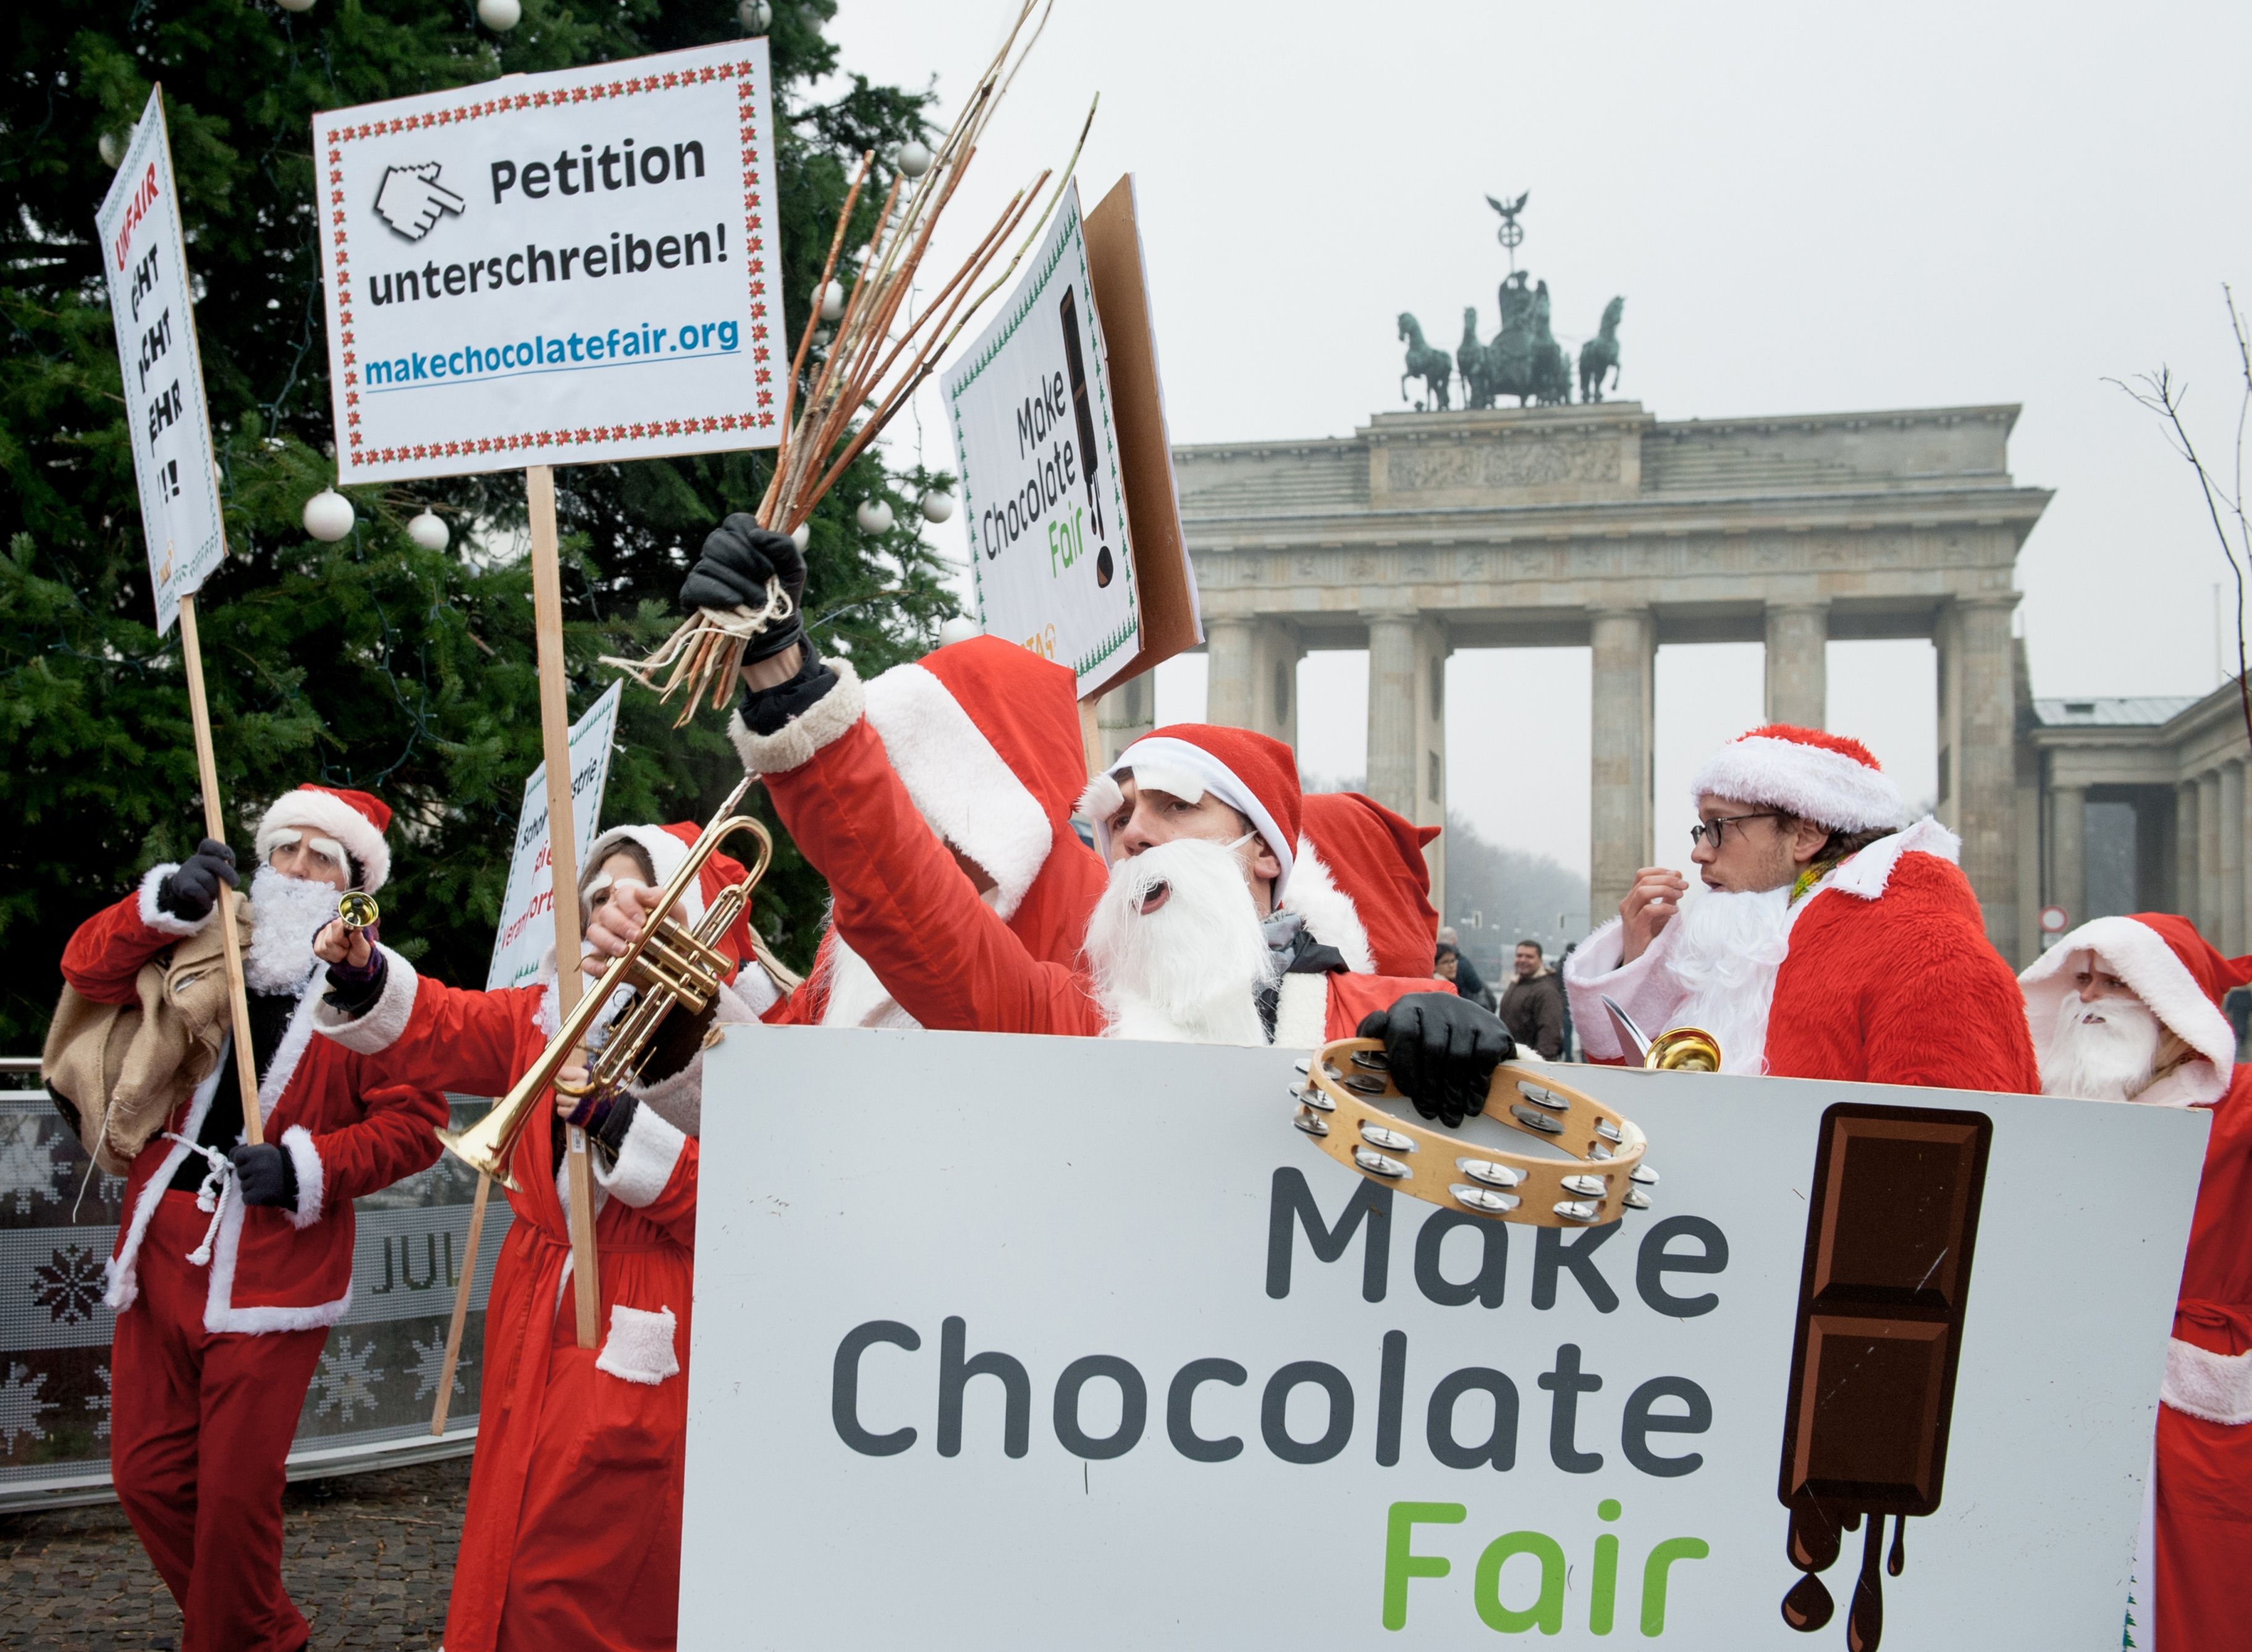 This Christmas we should avoid chocolate tainted with child labour. Photo: AFP